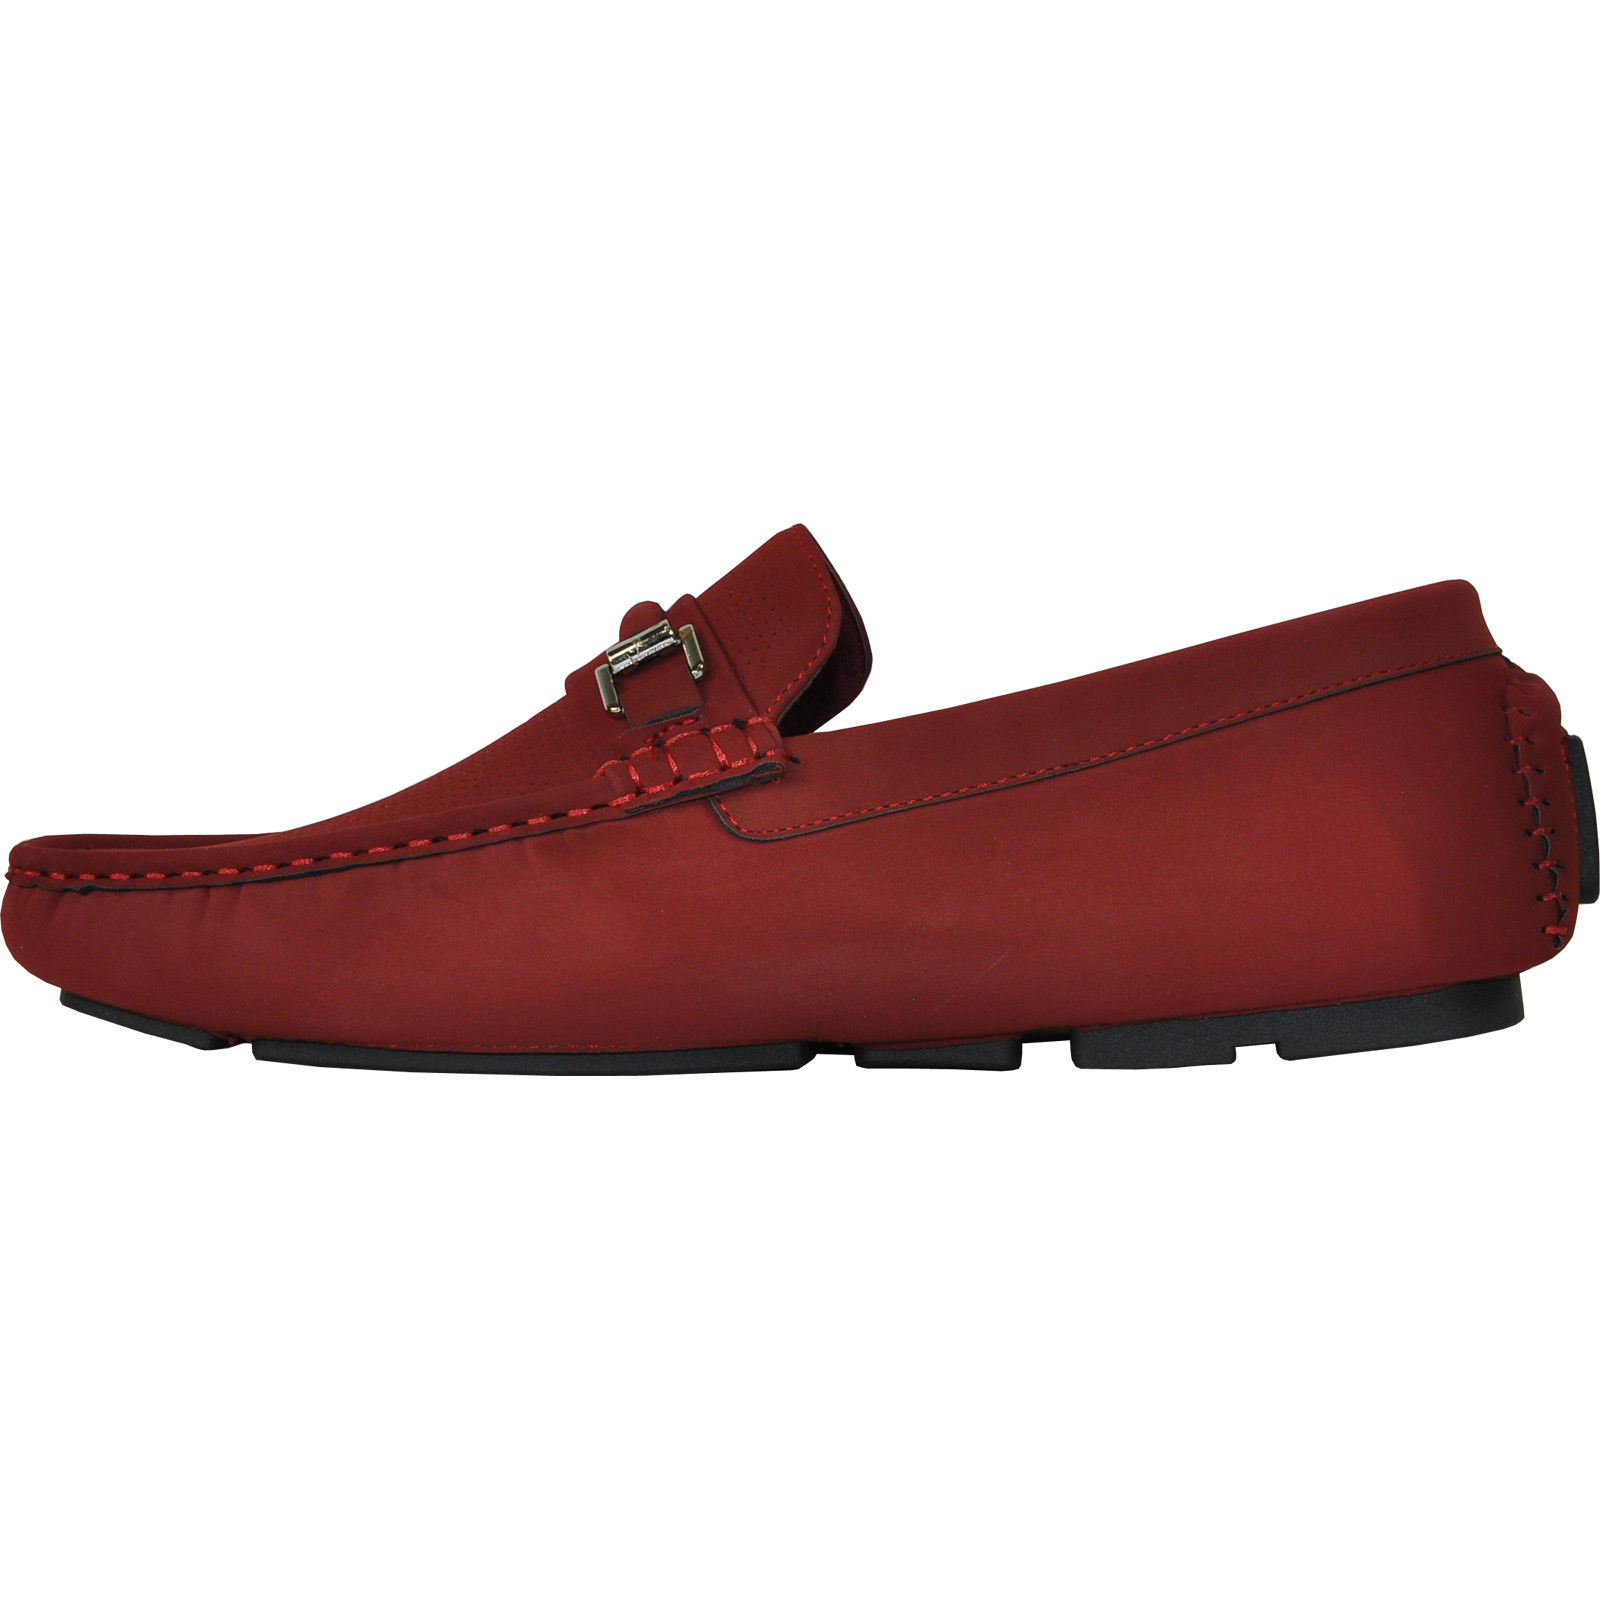 Bravo! Men Casual Shoe Todd-1 Driving Moccasin Red 14M US - image 5 of 7